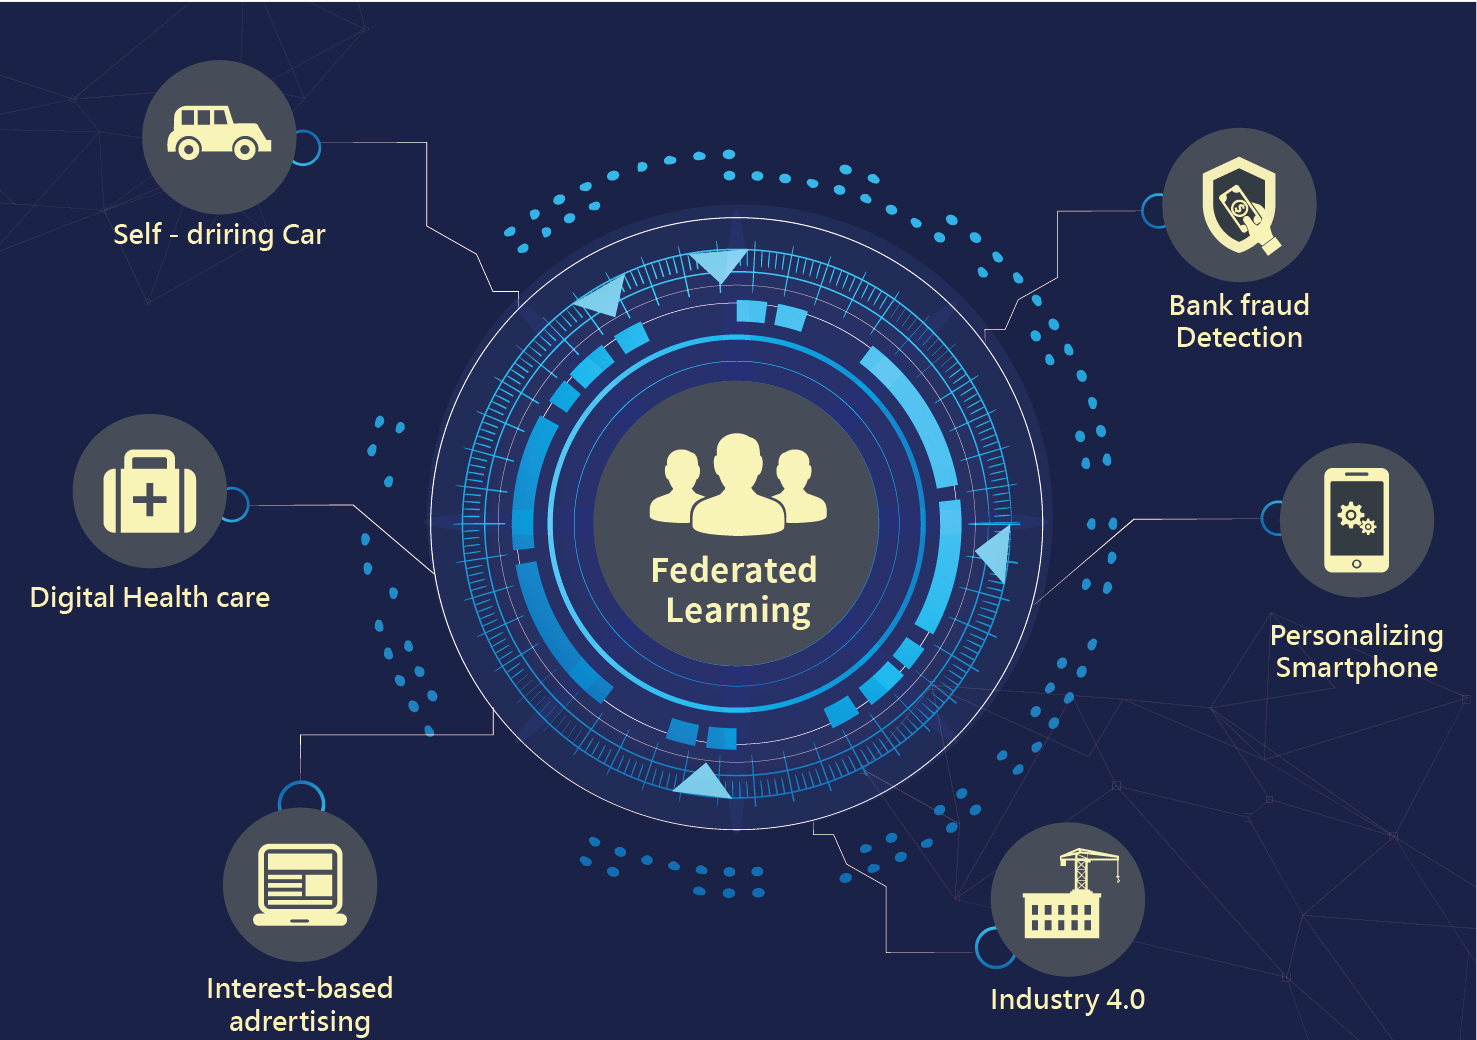 Federated Learning Applications